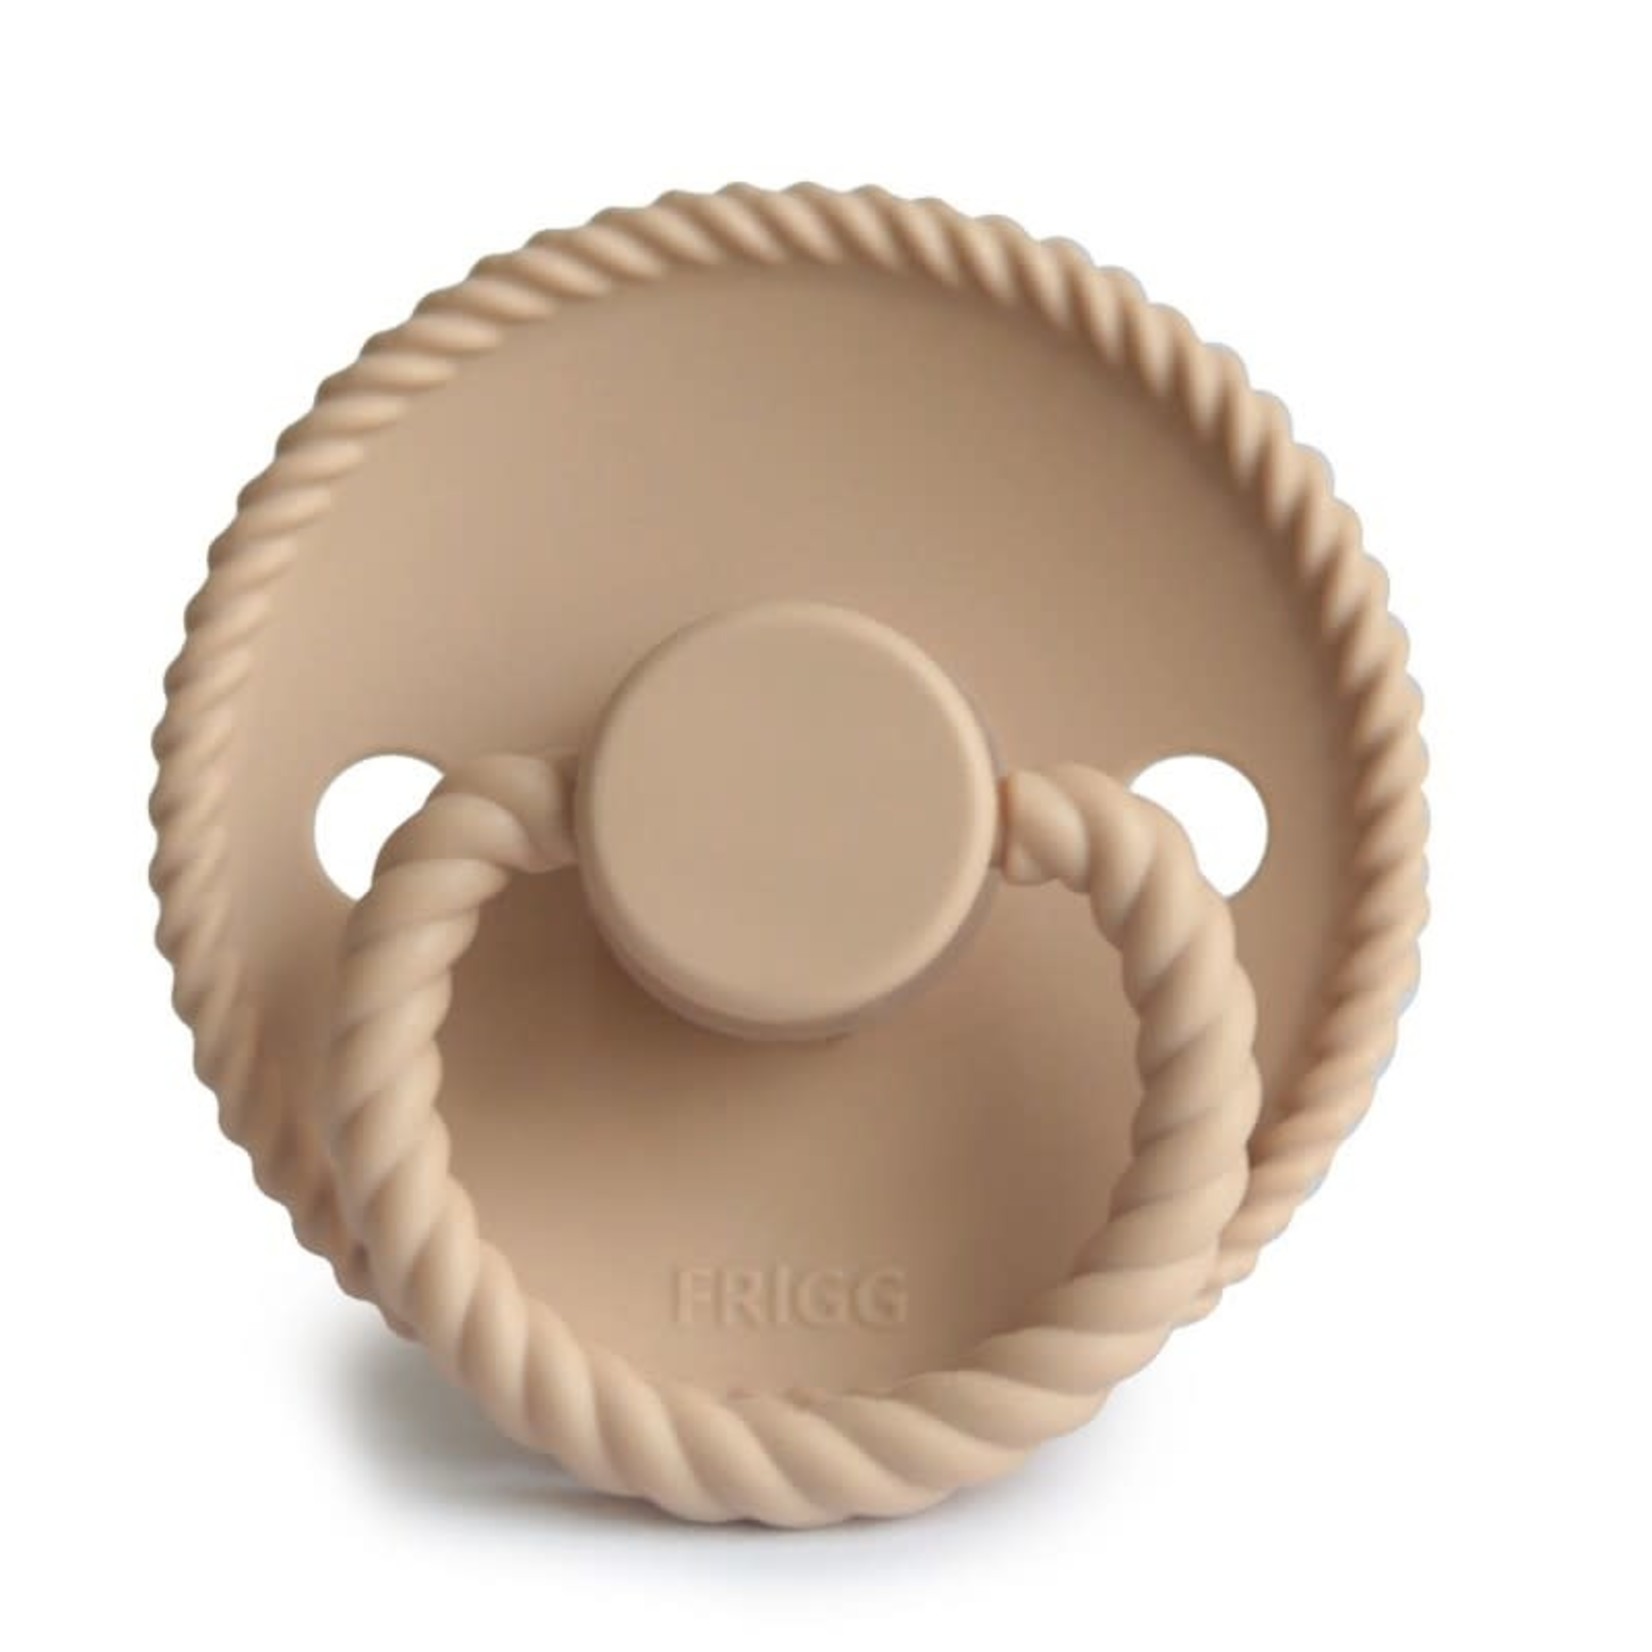 Frigg ROPE - FOPSPEEN SILICONE - CROISSANT - T2